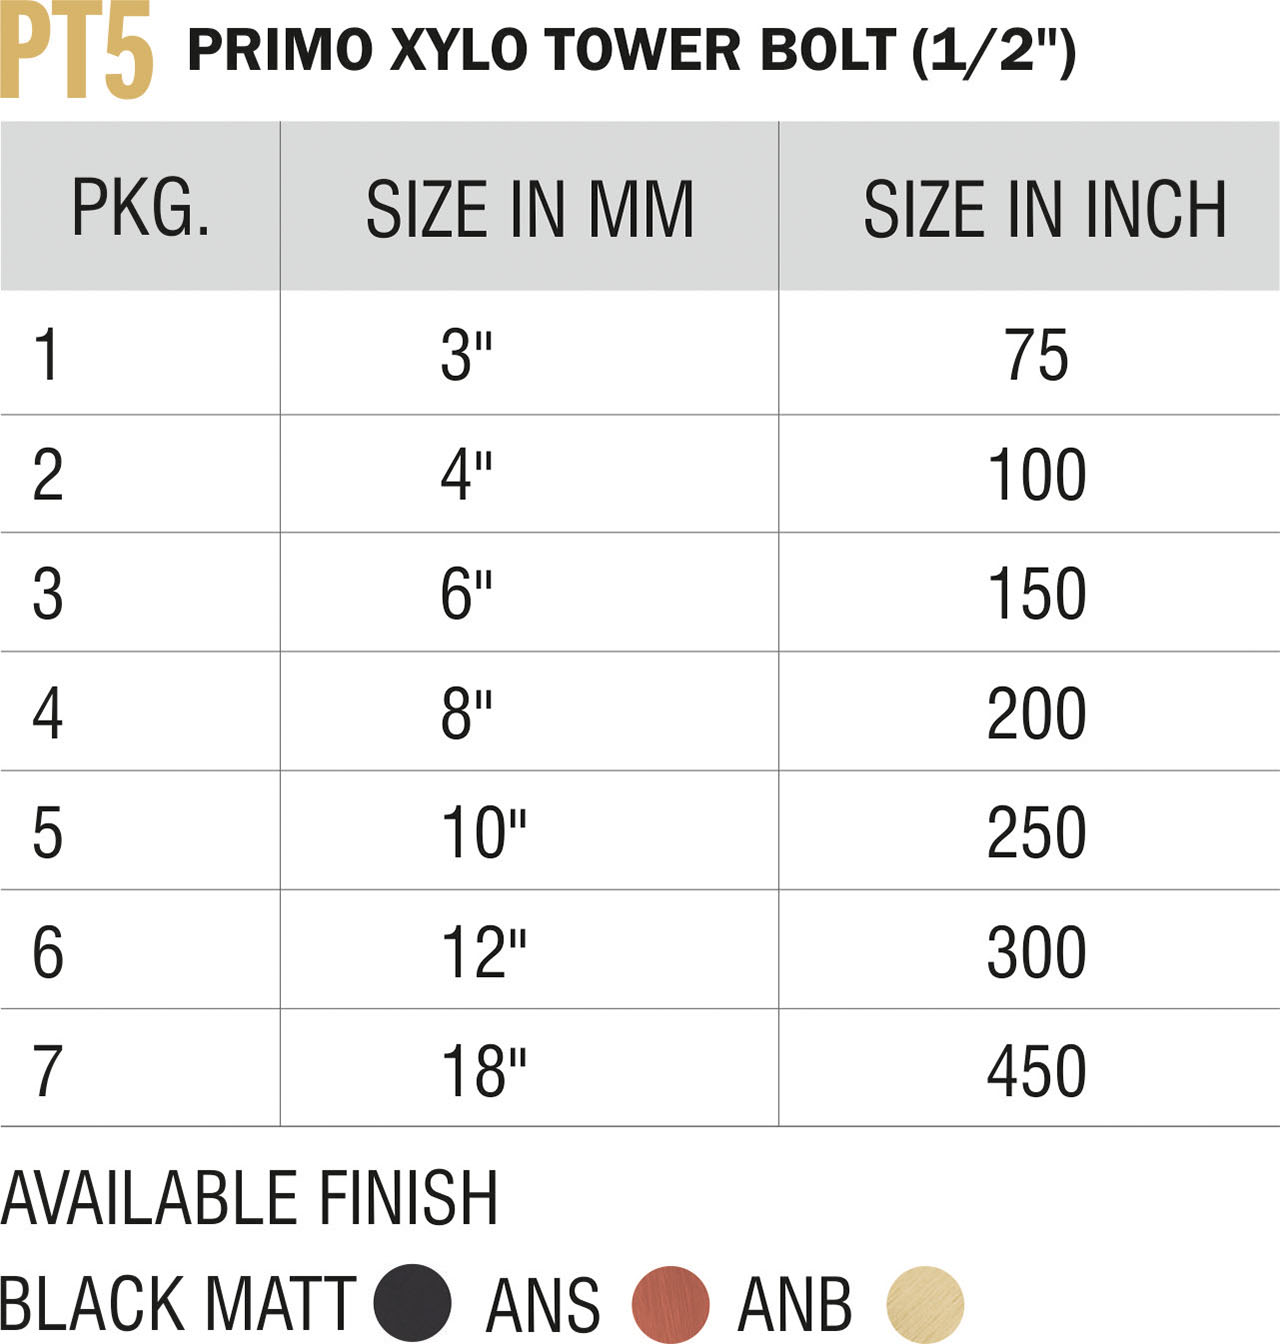 Exclusive Tower Bolts